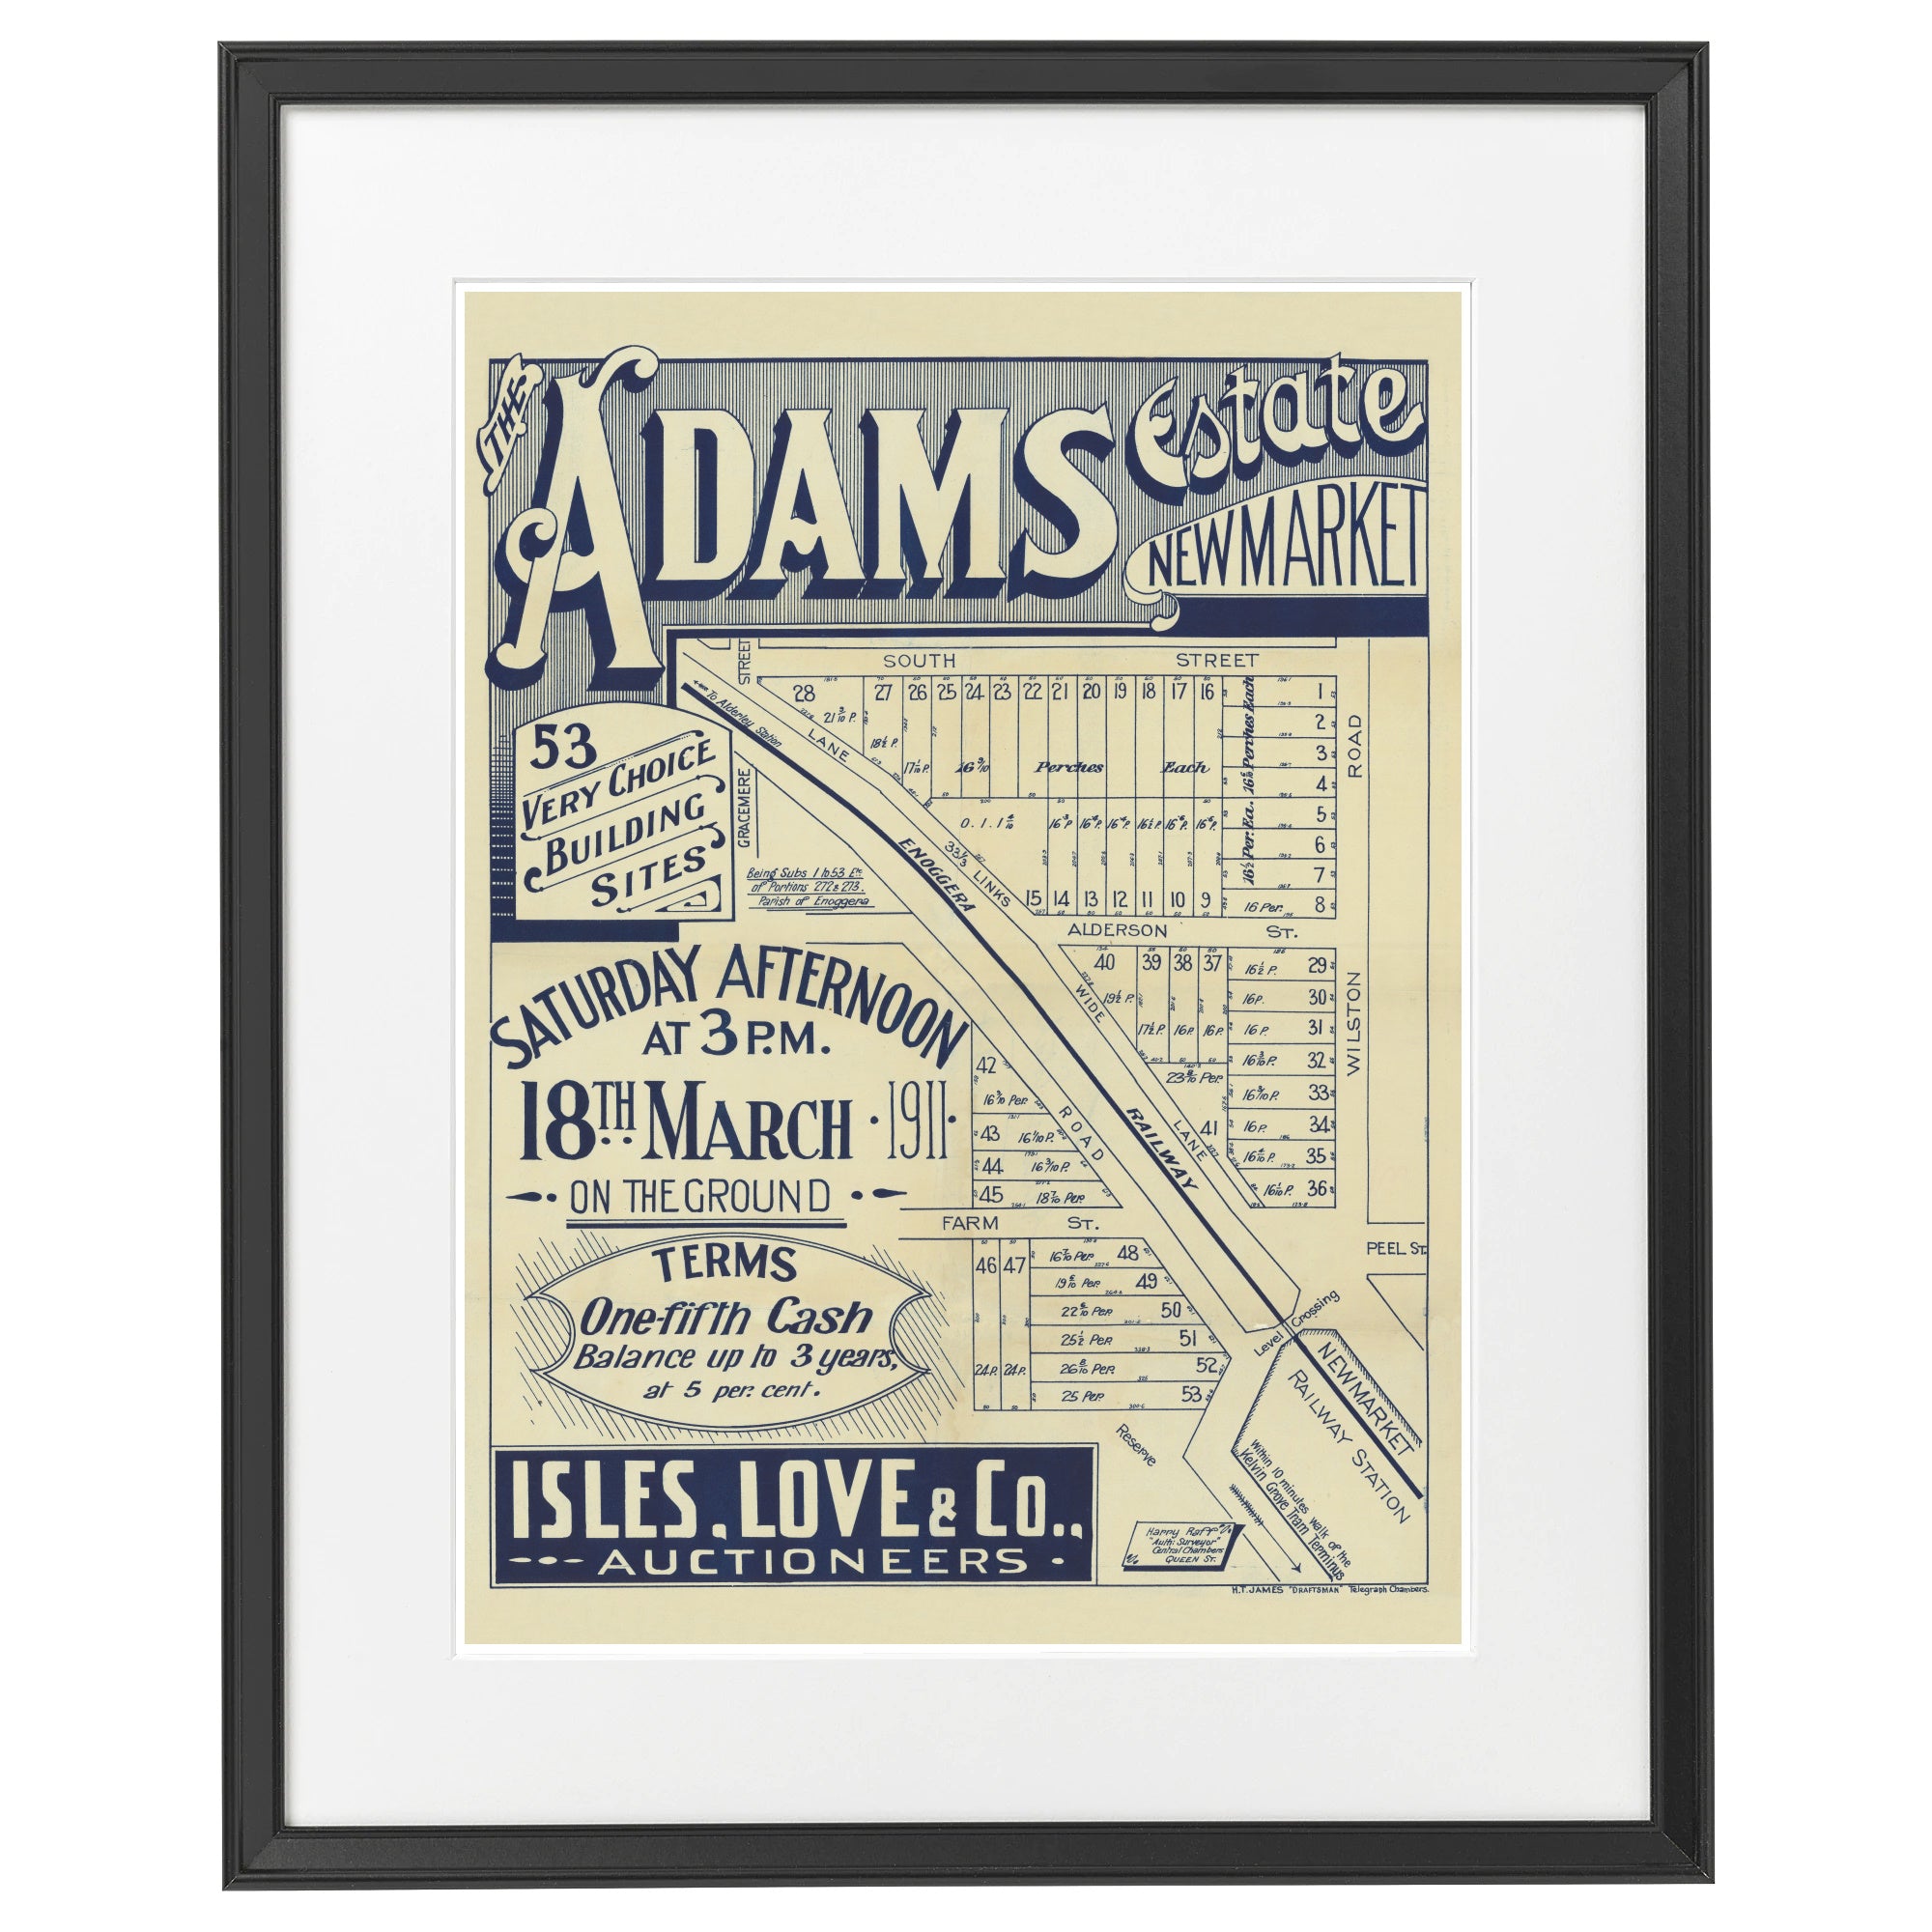 1911 The Adams Estate - 112 years ago today